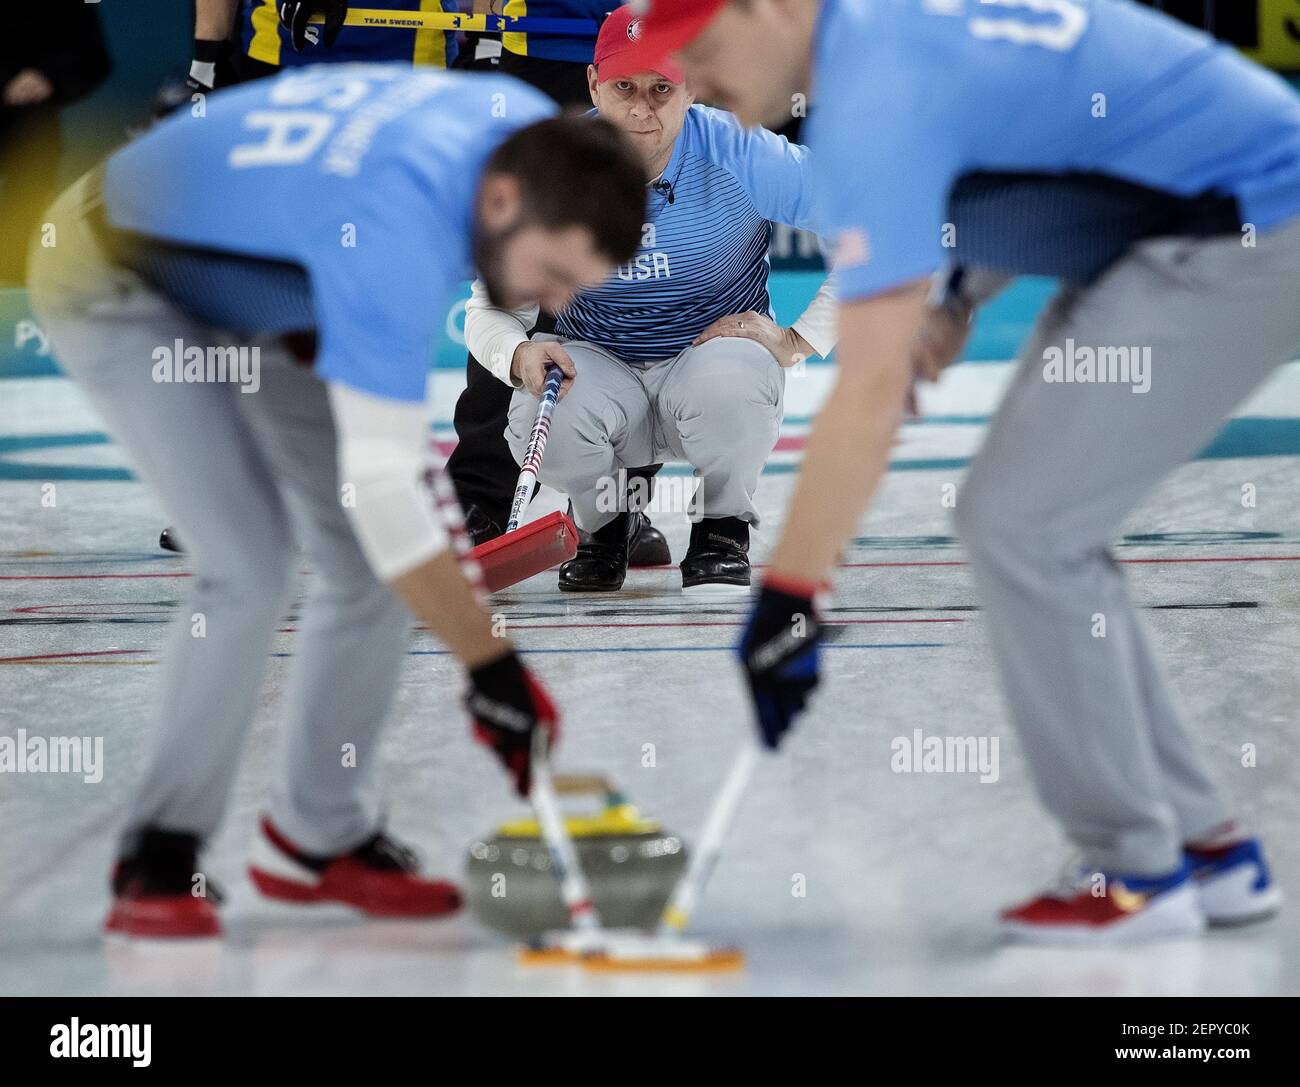 USA team skip John Shuster watches John Landsteiner and Matt Hamilton sweep in front of the rock during the gold-medal match against Sweden on Saturday, Feb. 24, 2018, at the Pyeongchang Winter Olympics' Gangneung Curling Centre. The USA won, 10-7. (Photo by Carlos Gonzalez/Minneapolis Star Tribune/TNS/Sipa USA) Stock Photo